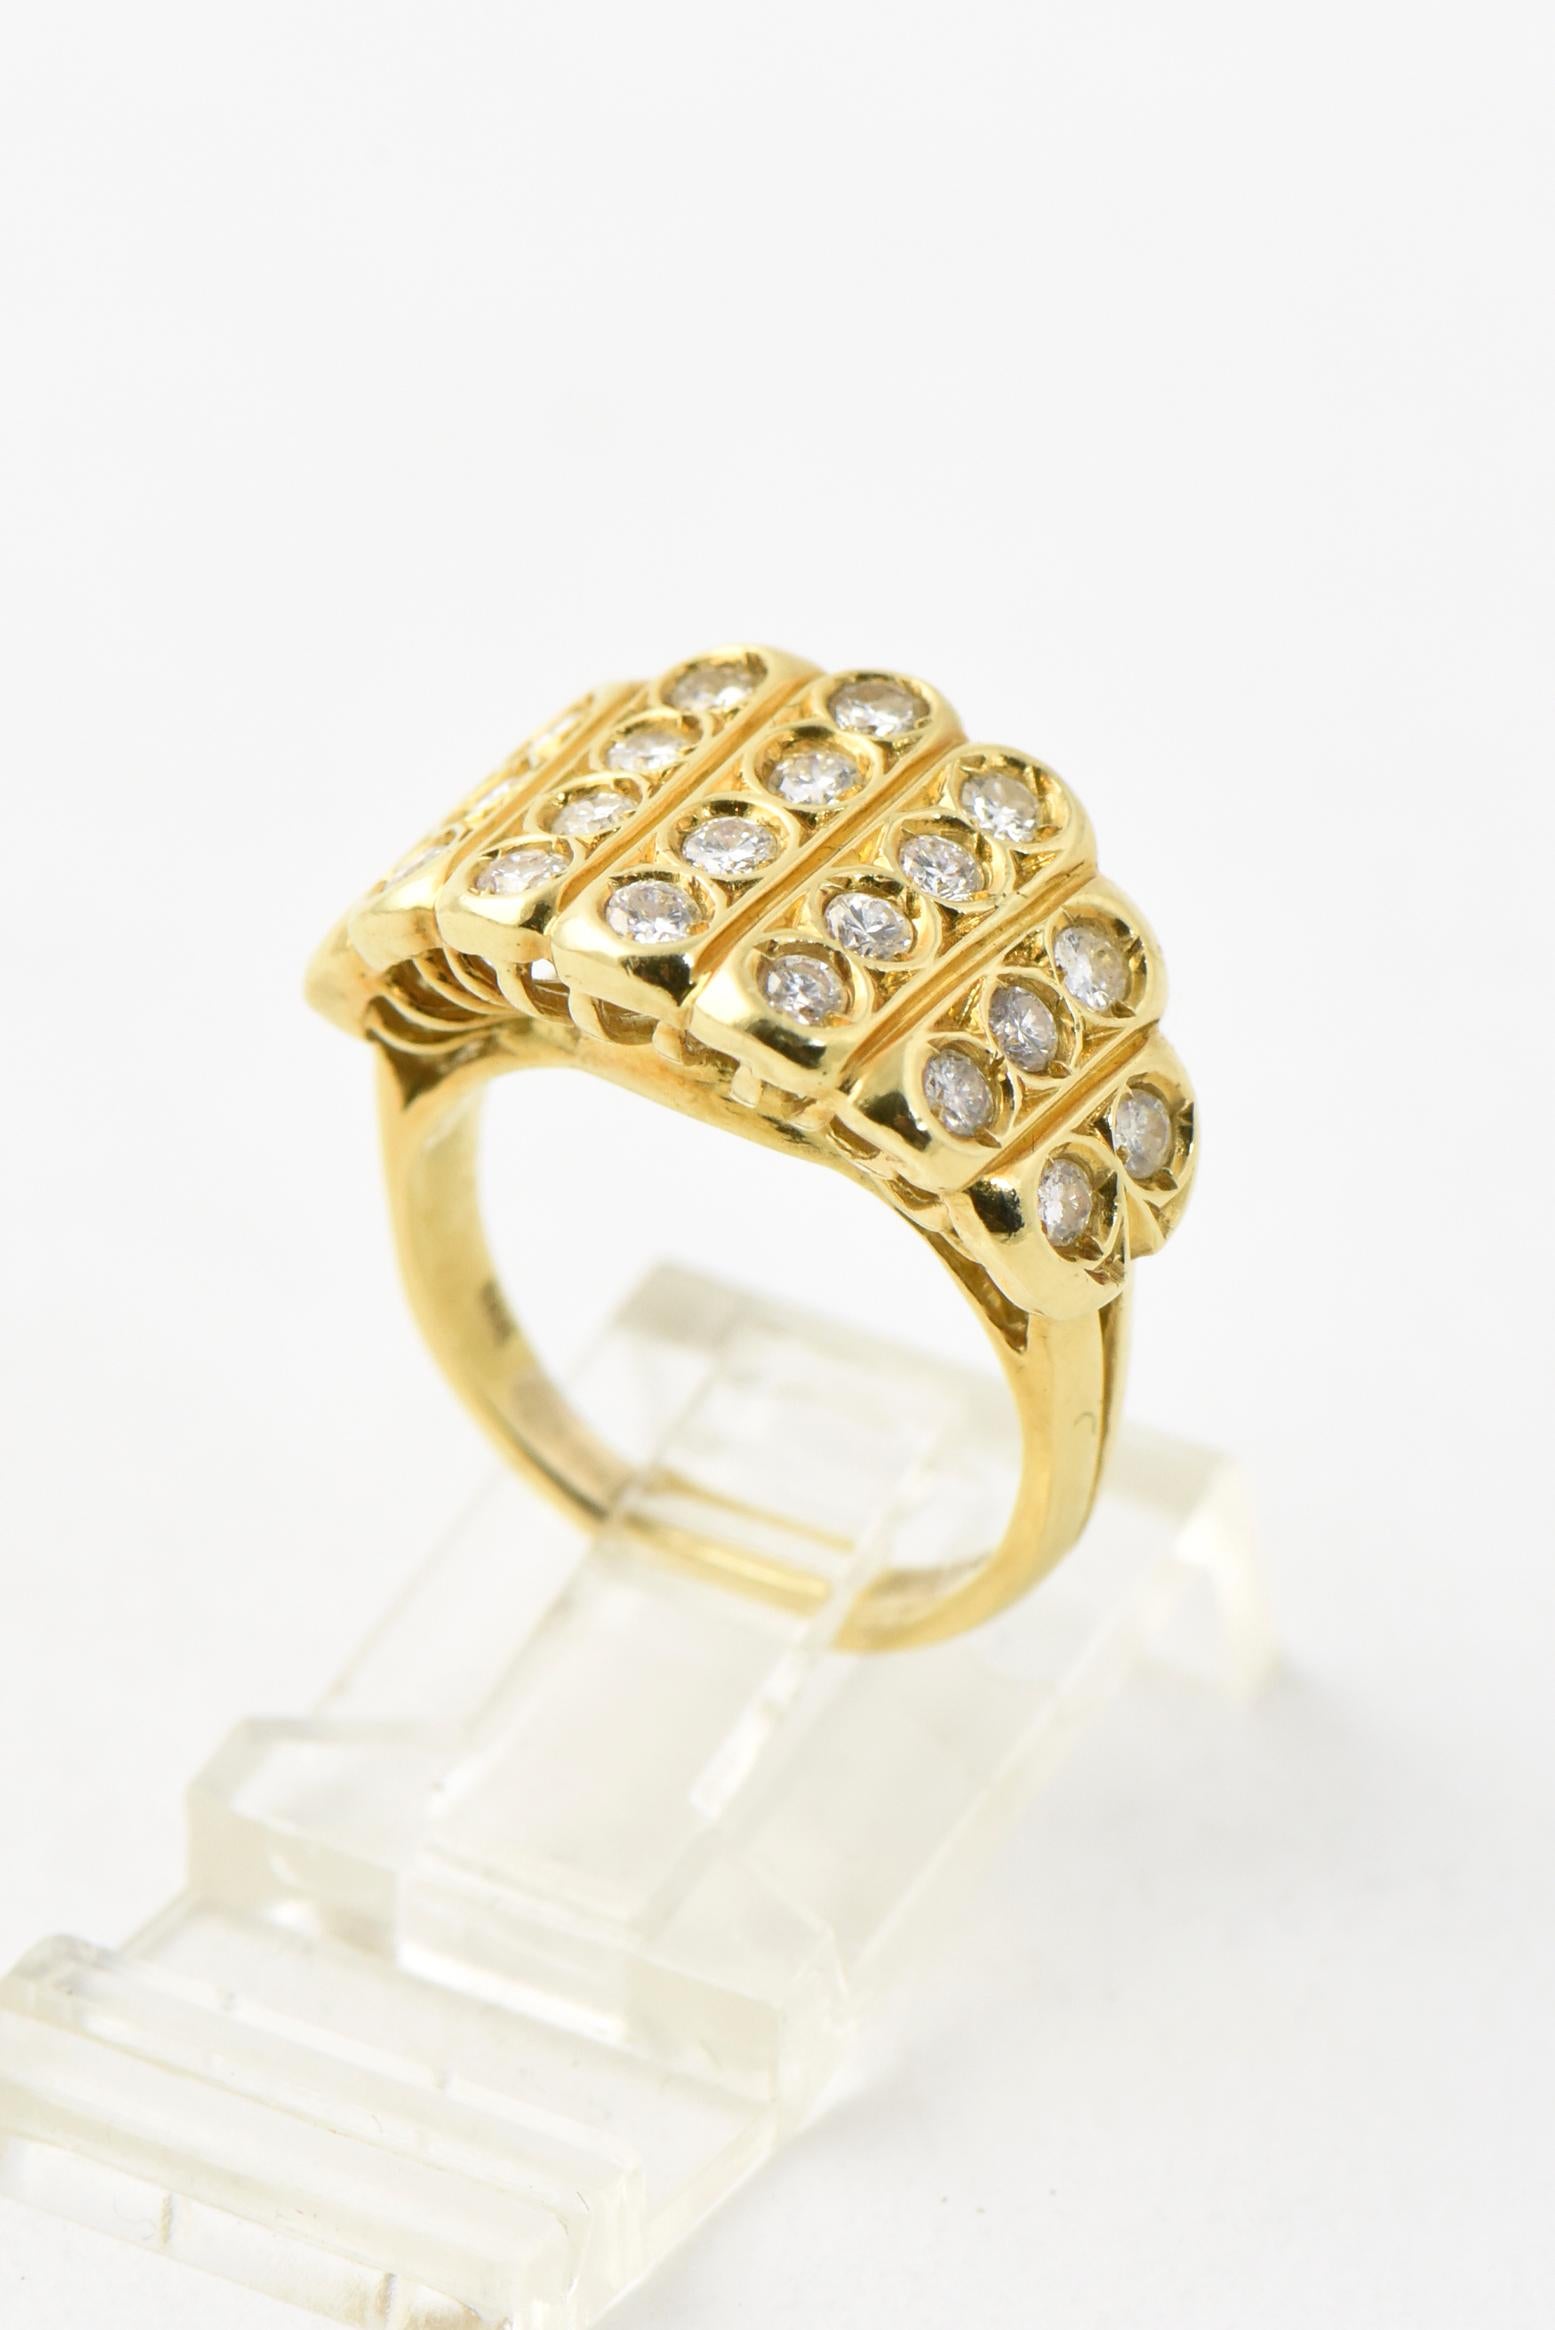 Beautifully made 18K yellow gold and diamond ring with seven columns of fine quality bezel-set diamonds that graduate towards the middle. Approximate diamond weight is 1.10c of G-H, VS-SI stones. Marked 18K. US size 4.5; can be resized.